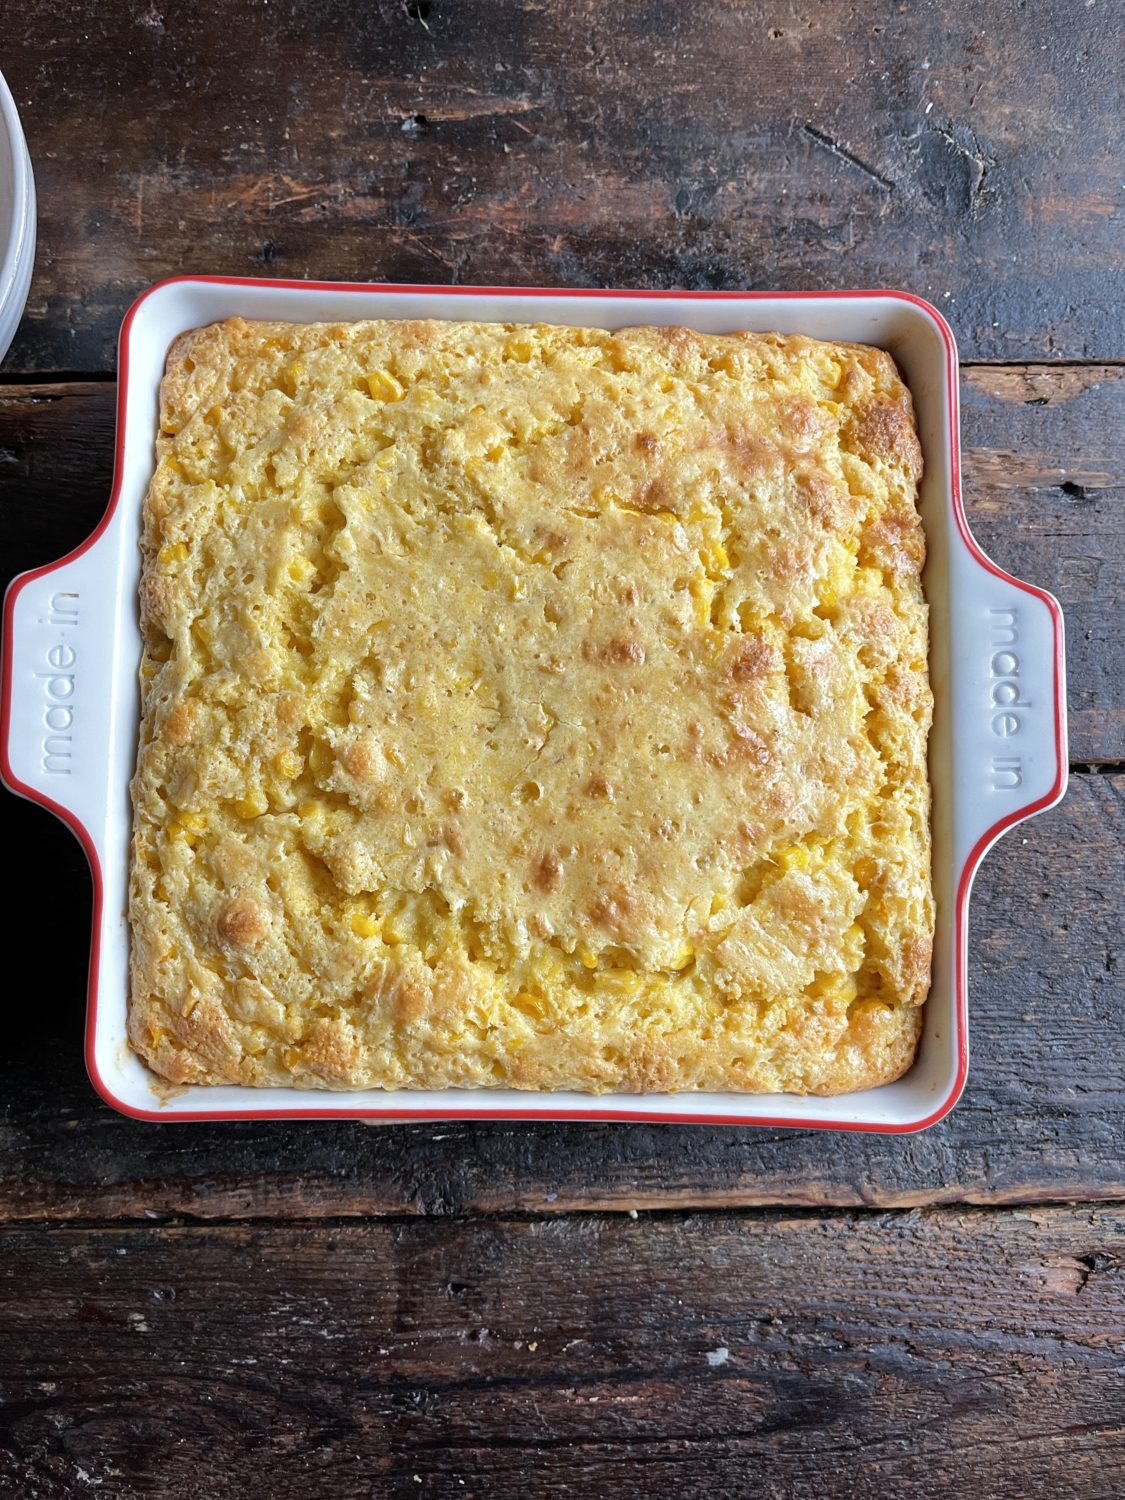 corn souffle baked in dish